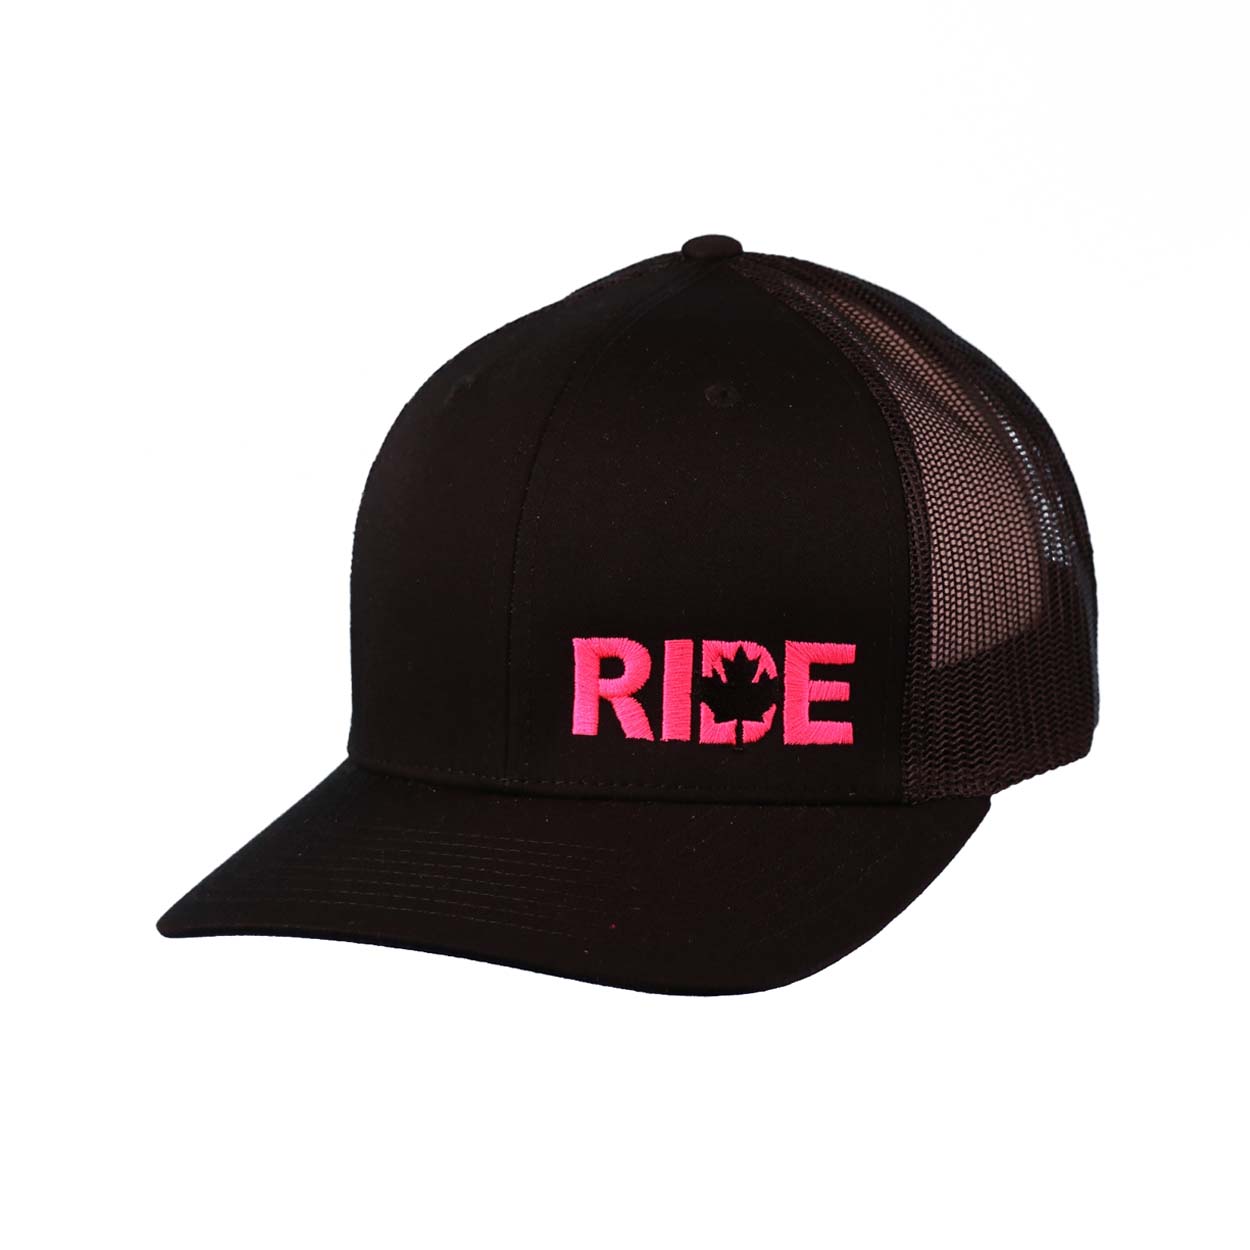 Ride Canada Night Out Embroidered Snapback Trucker Hat Black/Pink